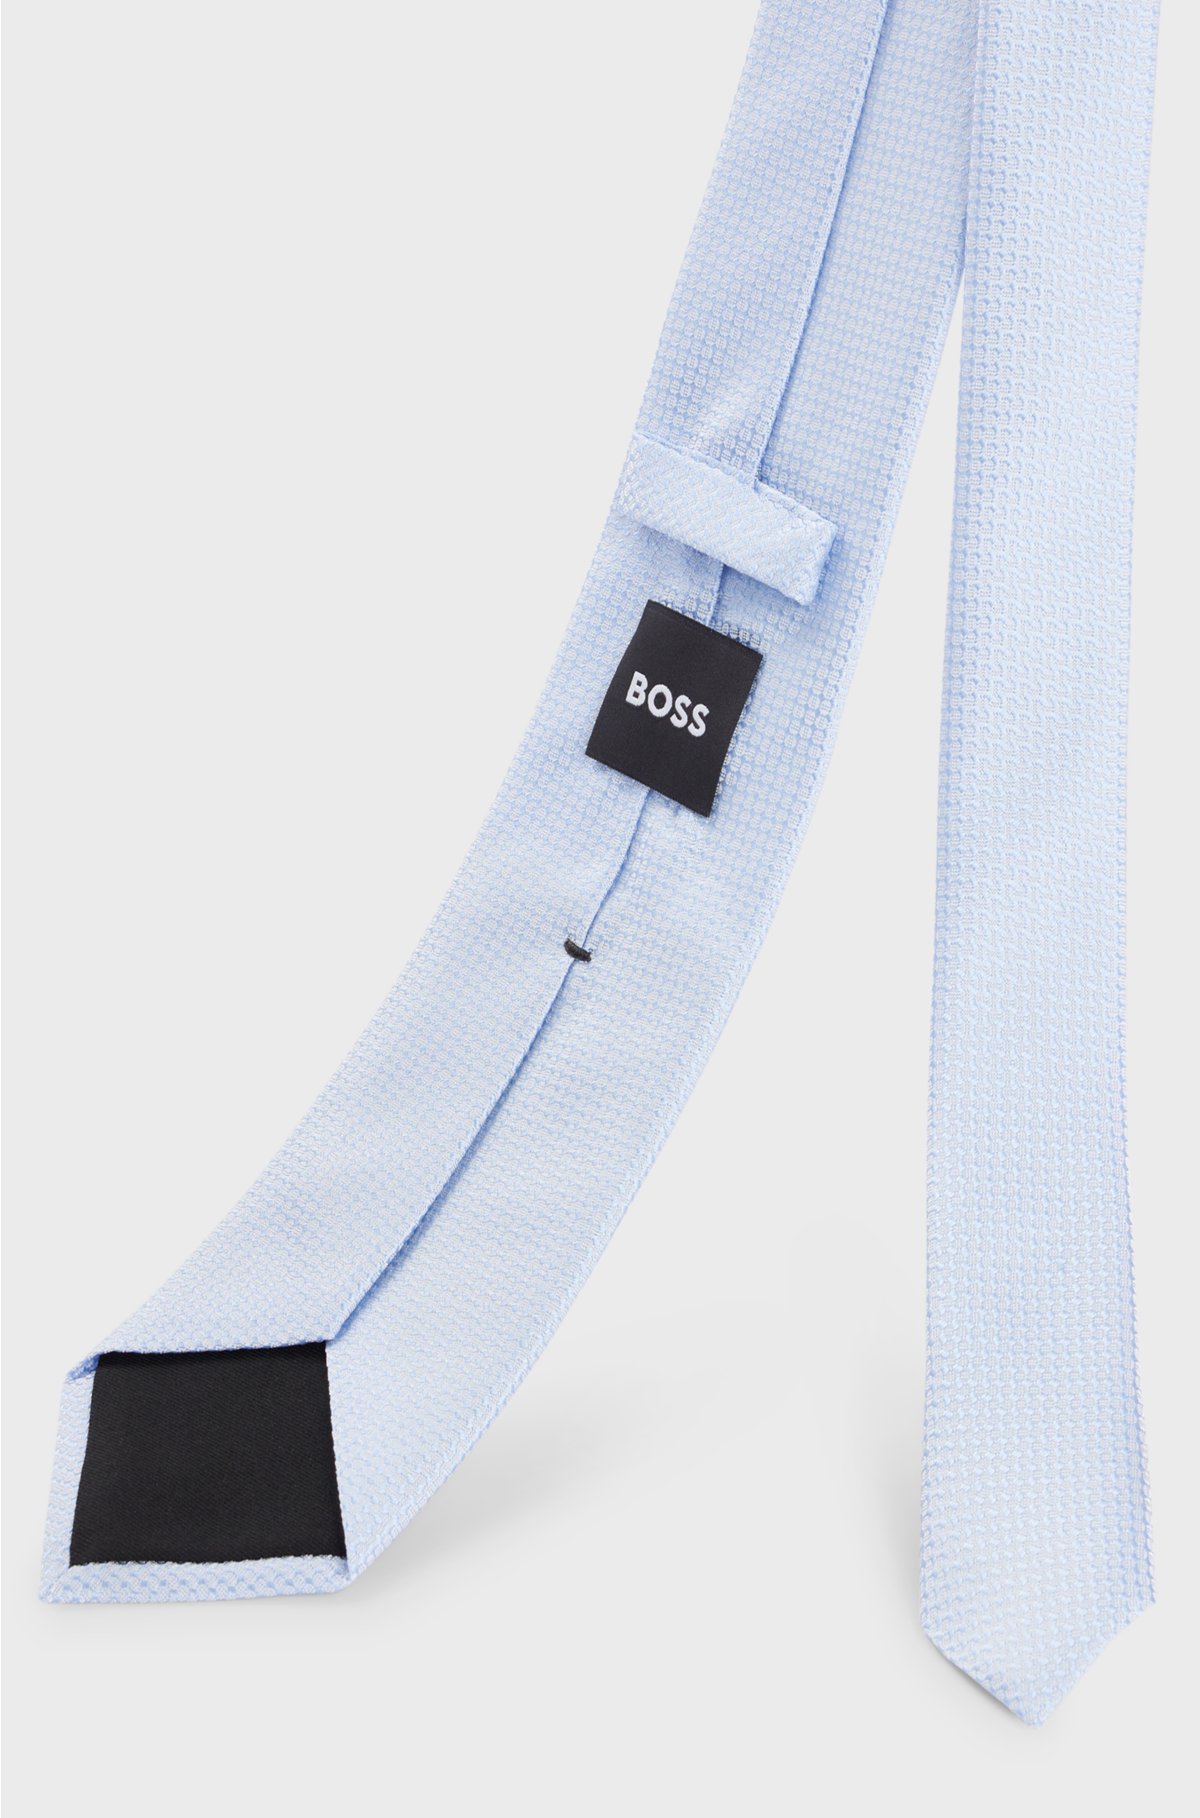 Silk-blend tie with all-over jacquard pattern, Light Blue